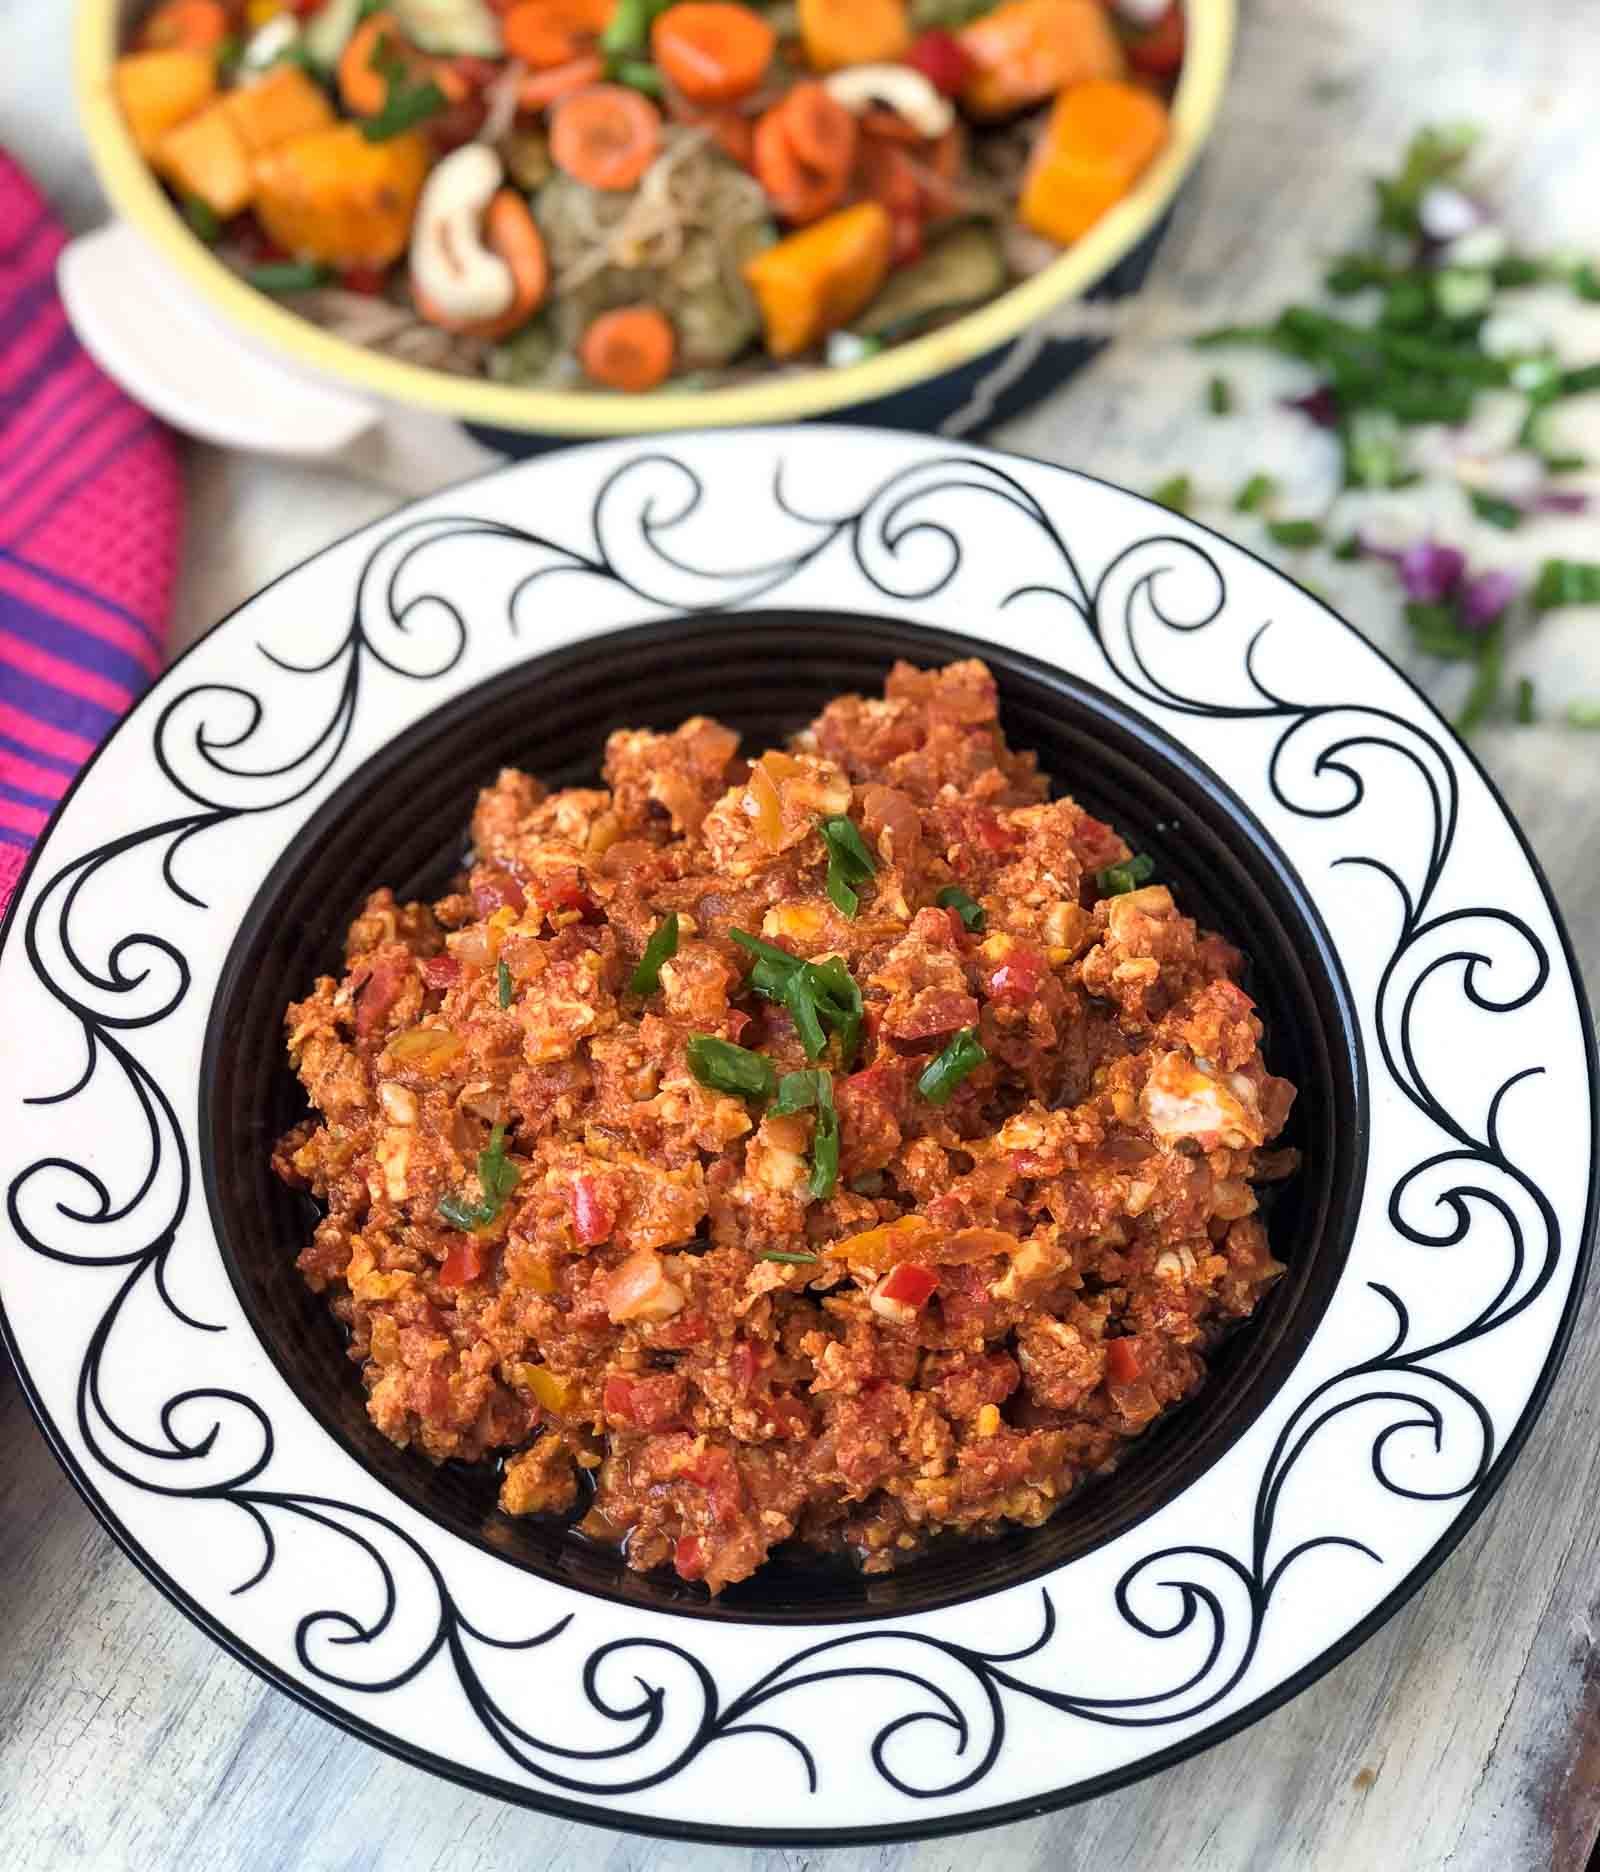 Menemen Recipe - Turkish Style Egg Scramble With Bell Peppers